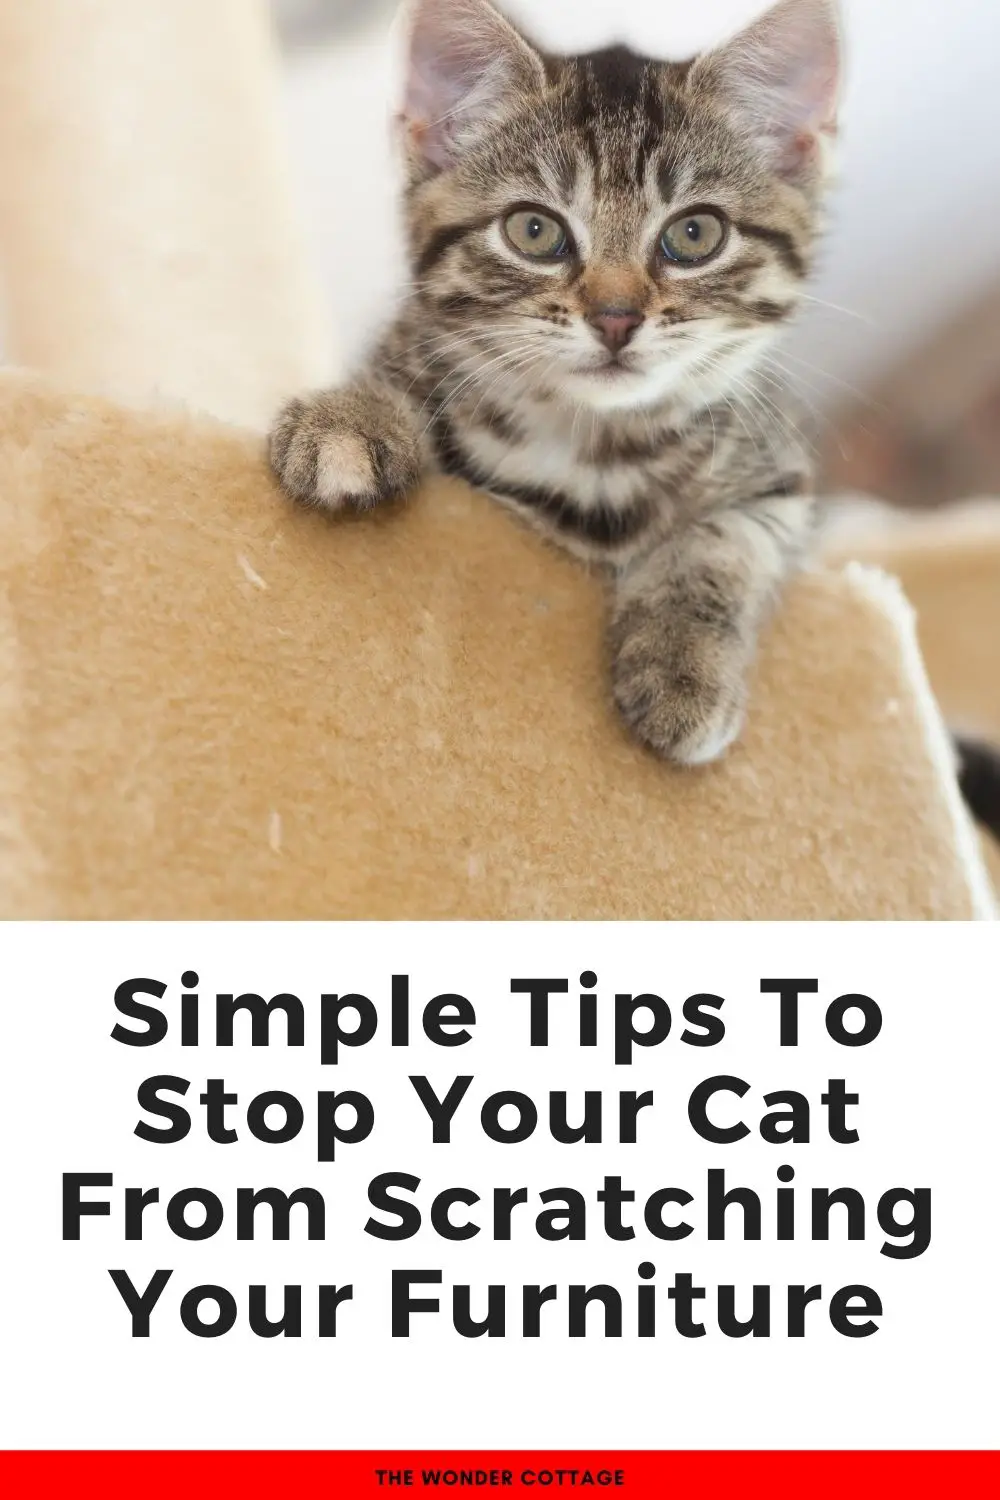 Simple tips to stop your cat from scratching your furniture